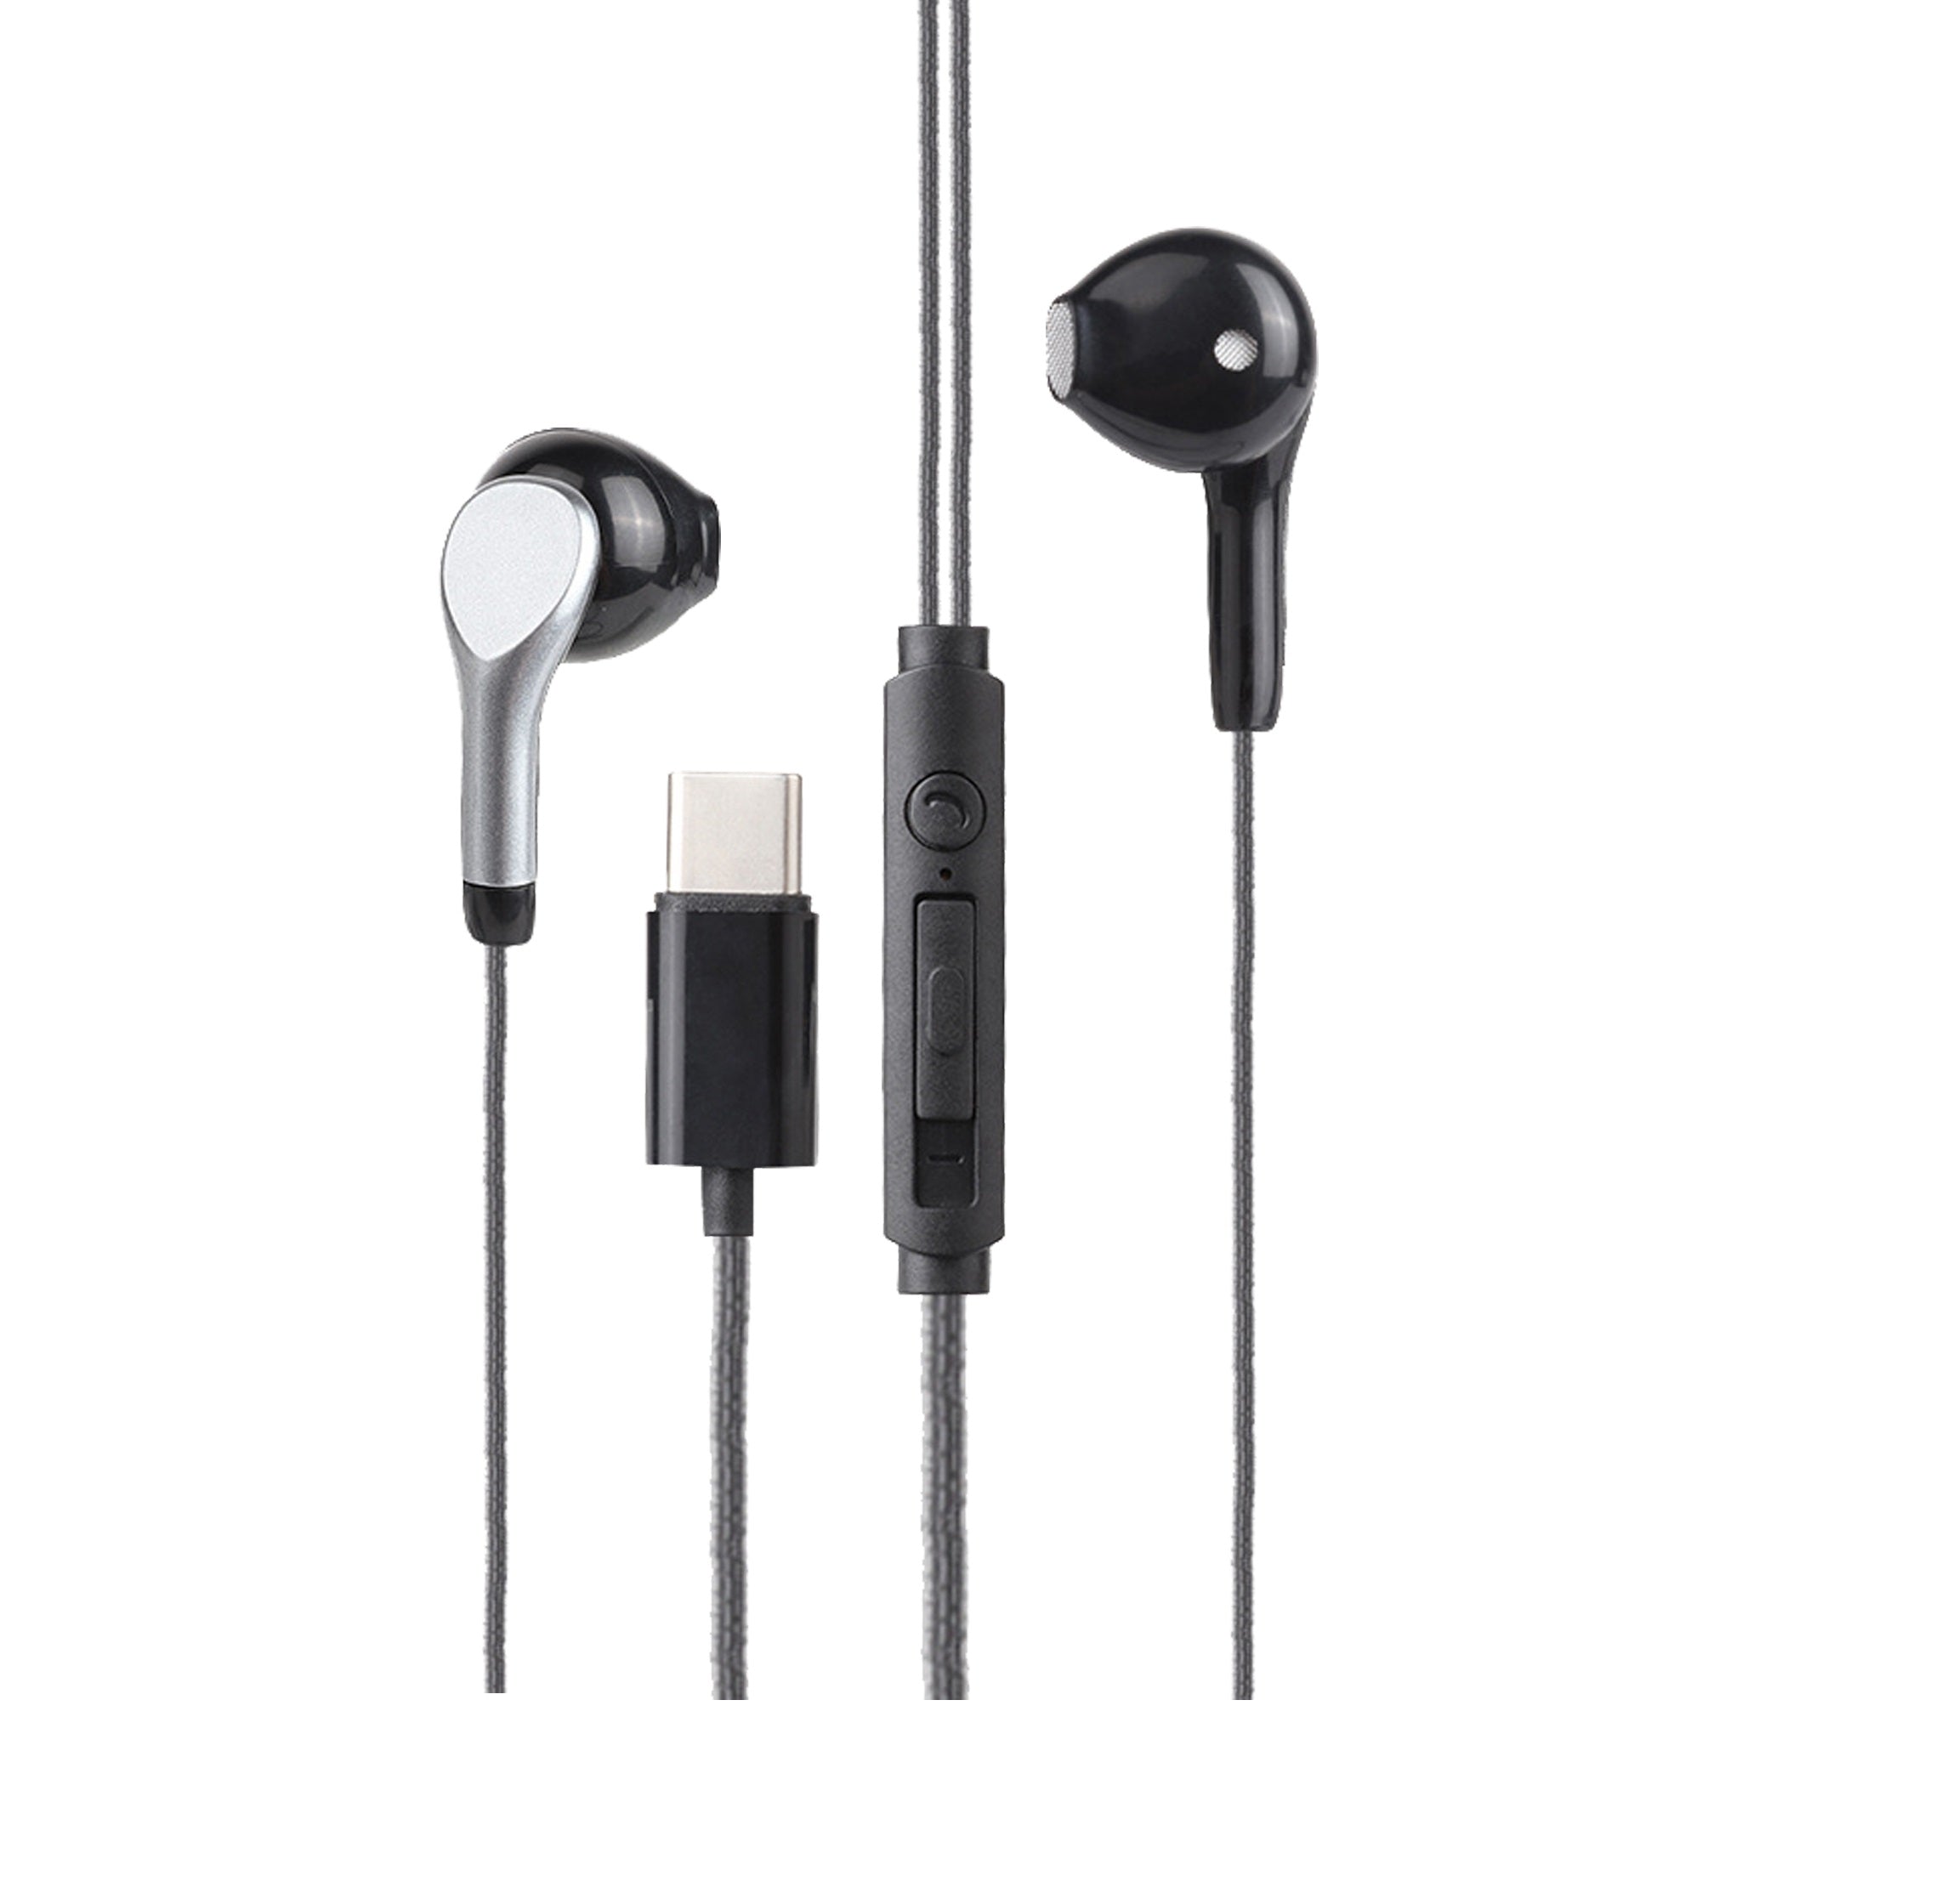 Gizmore ME343 Type C Earphones High Bass and Noise Reduction Unique Sports Earphone with HD Microphone